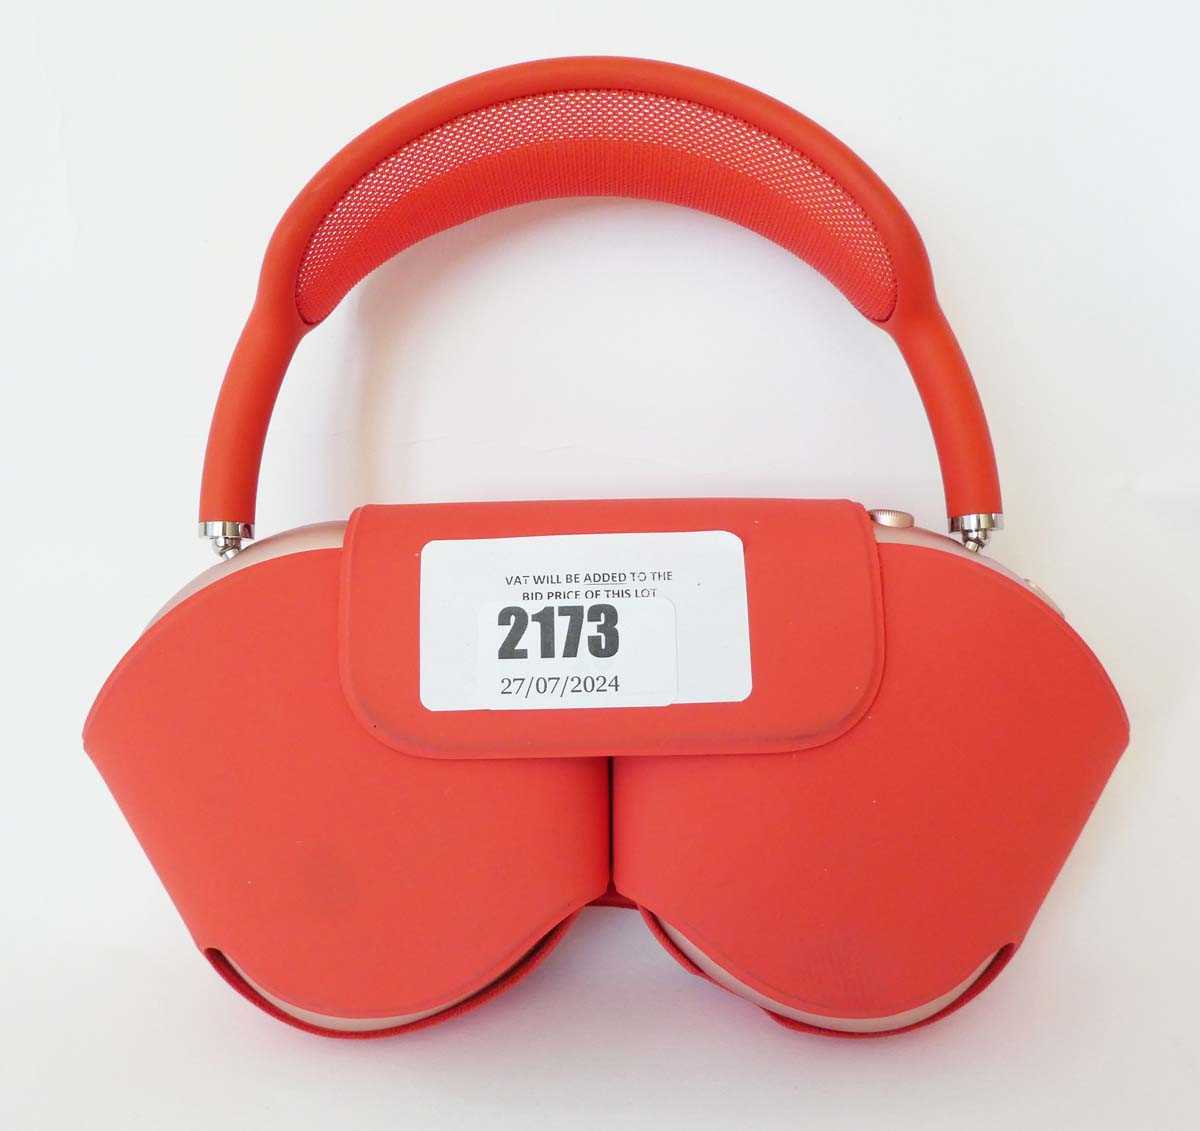 Lot 2173 - AirPods Max Red